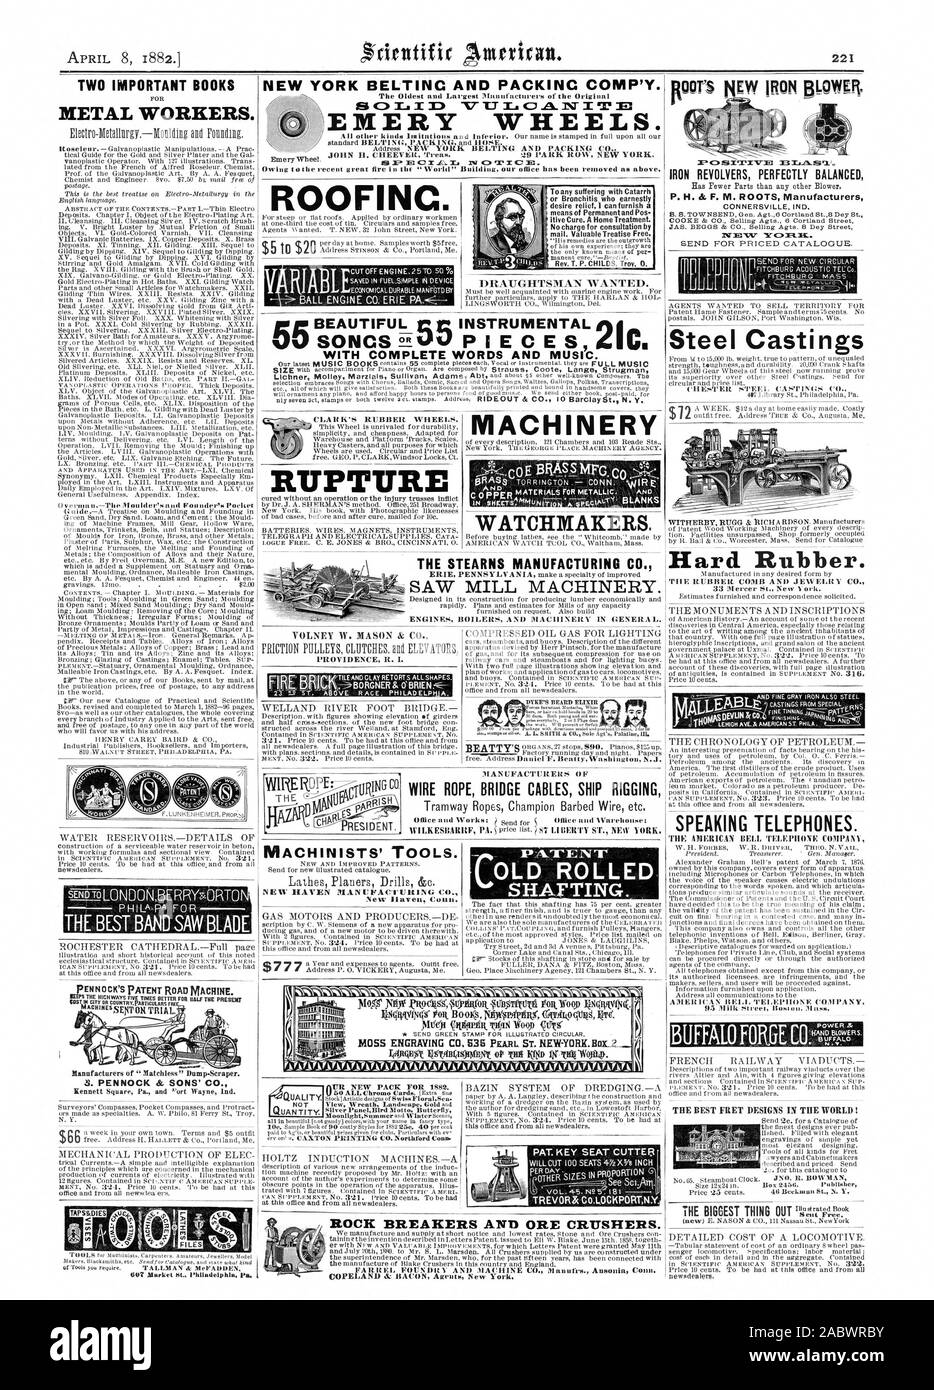 TWO IMPORTANT BOOKS FOR METAL WORKERS. OFINC. $5 to $20 VOLNEY W. MASON & CO. PROVIDENCE R. I. mail. Valuable Treatise Free. DRAUGHTSMAN WANTED. MACHINERY WATCHMAKERS. PAT. KEY SEAT CUTTE rITKER IBITIVM IRON REVOLVERS PERFECTLY BALANCED P. H. as. F. M. ROOTS Manufacturers CONNERSVILLE IND. 8. 8. TOWNSEND Gen. Agt.6 CortlandSt.8 Dey St. COOKE & CO. Selling Agts. 6 Cortland Street JAS. BEGGS & CO. Selling Agts. 8 Dey Street TIFMNAT WC:SPEAK SEND FOR PRICED CATALOGUE. Steel Castings Hard Rubber. THE RUBBER. COMB AND JEWELRY CO. 33 Mercer St. New York. ON TRIAL. NUR NEW PACK FOR 188e. SPEAKING Stock Photo